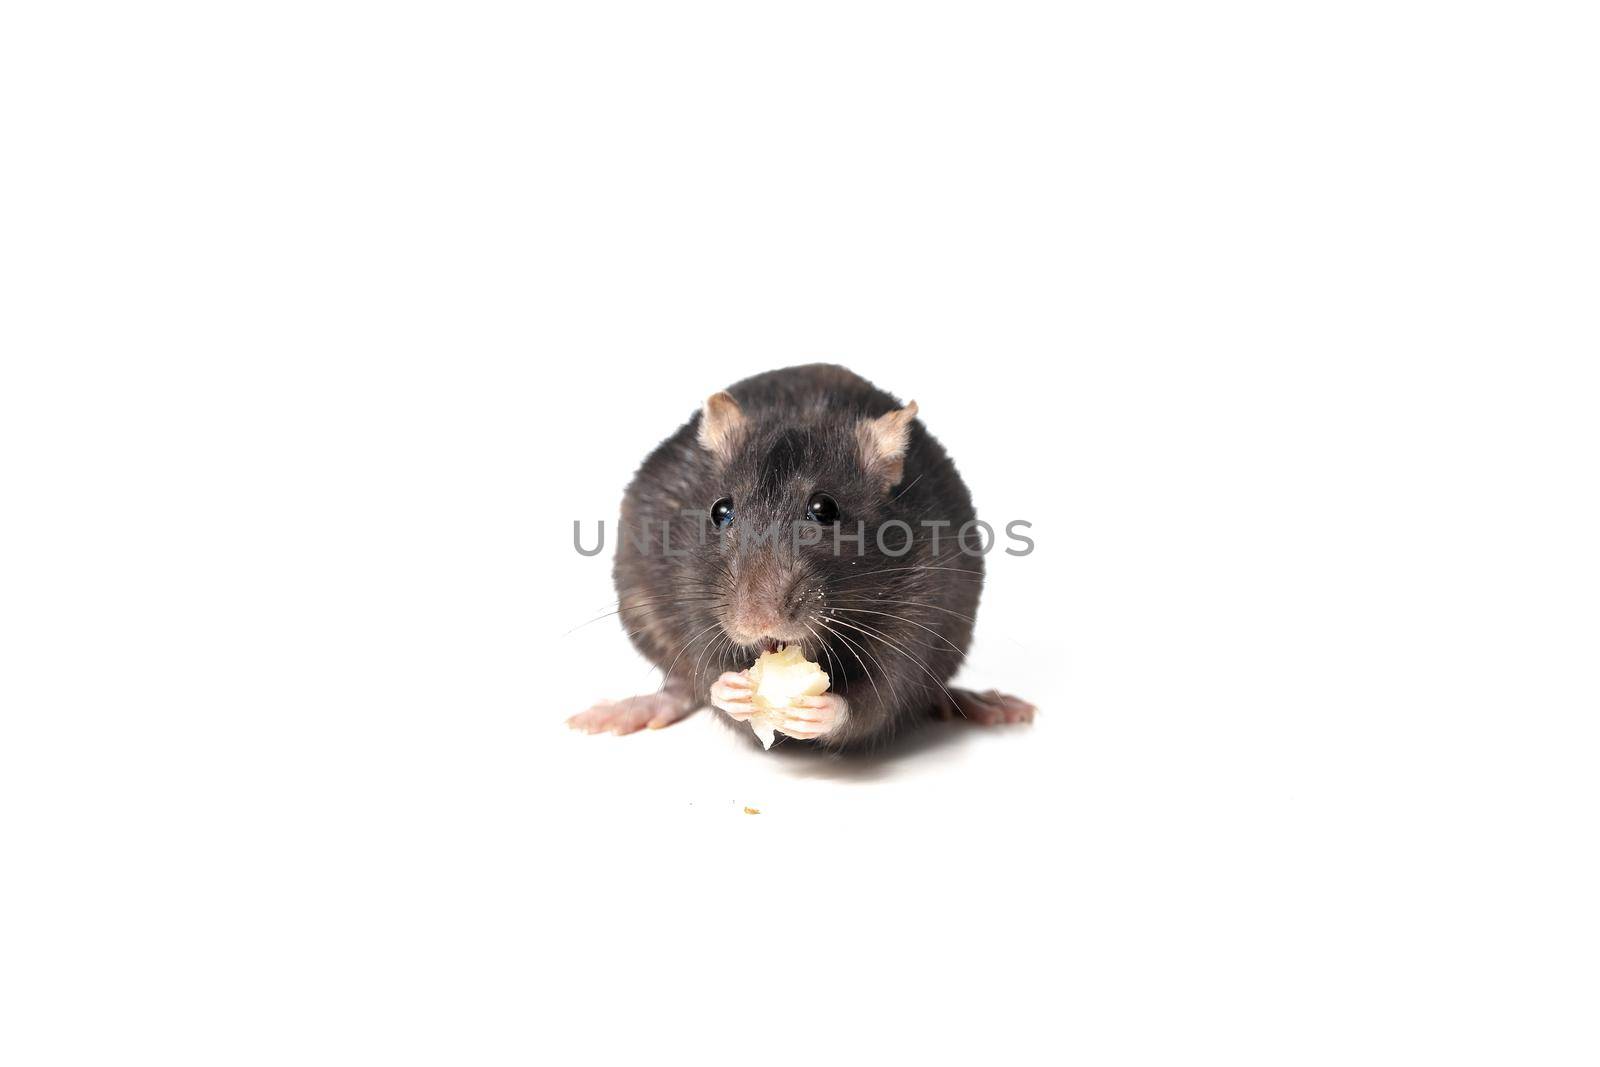 black rat eating cheese facing camera, isolated on white background. rodent animal eating with its paws. animal concept. by CatPhotography